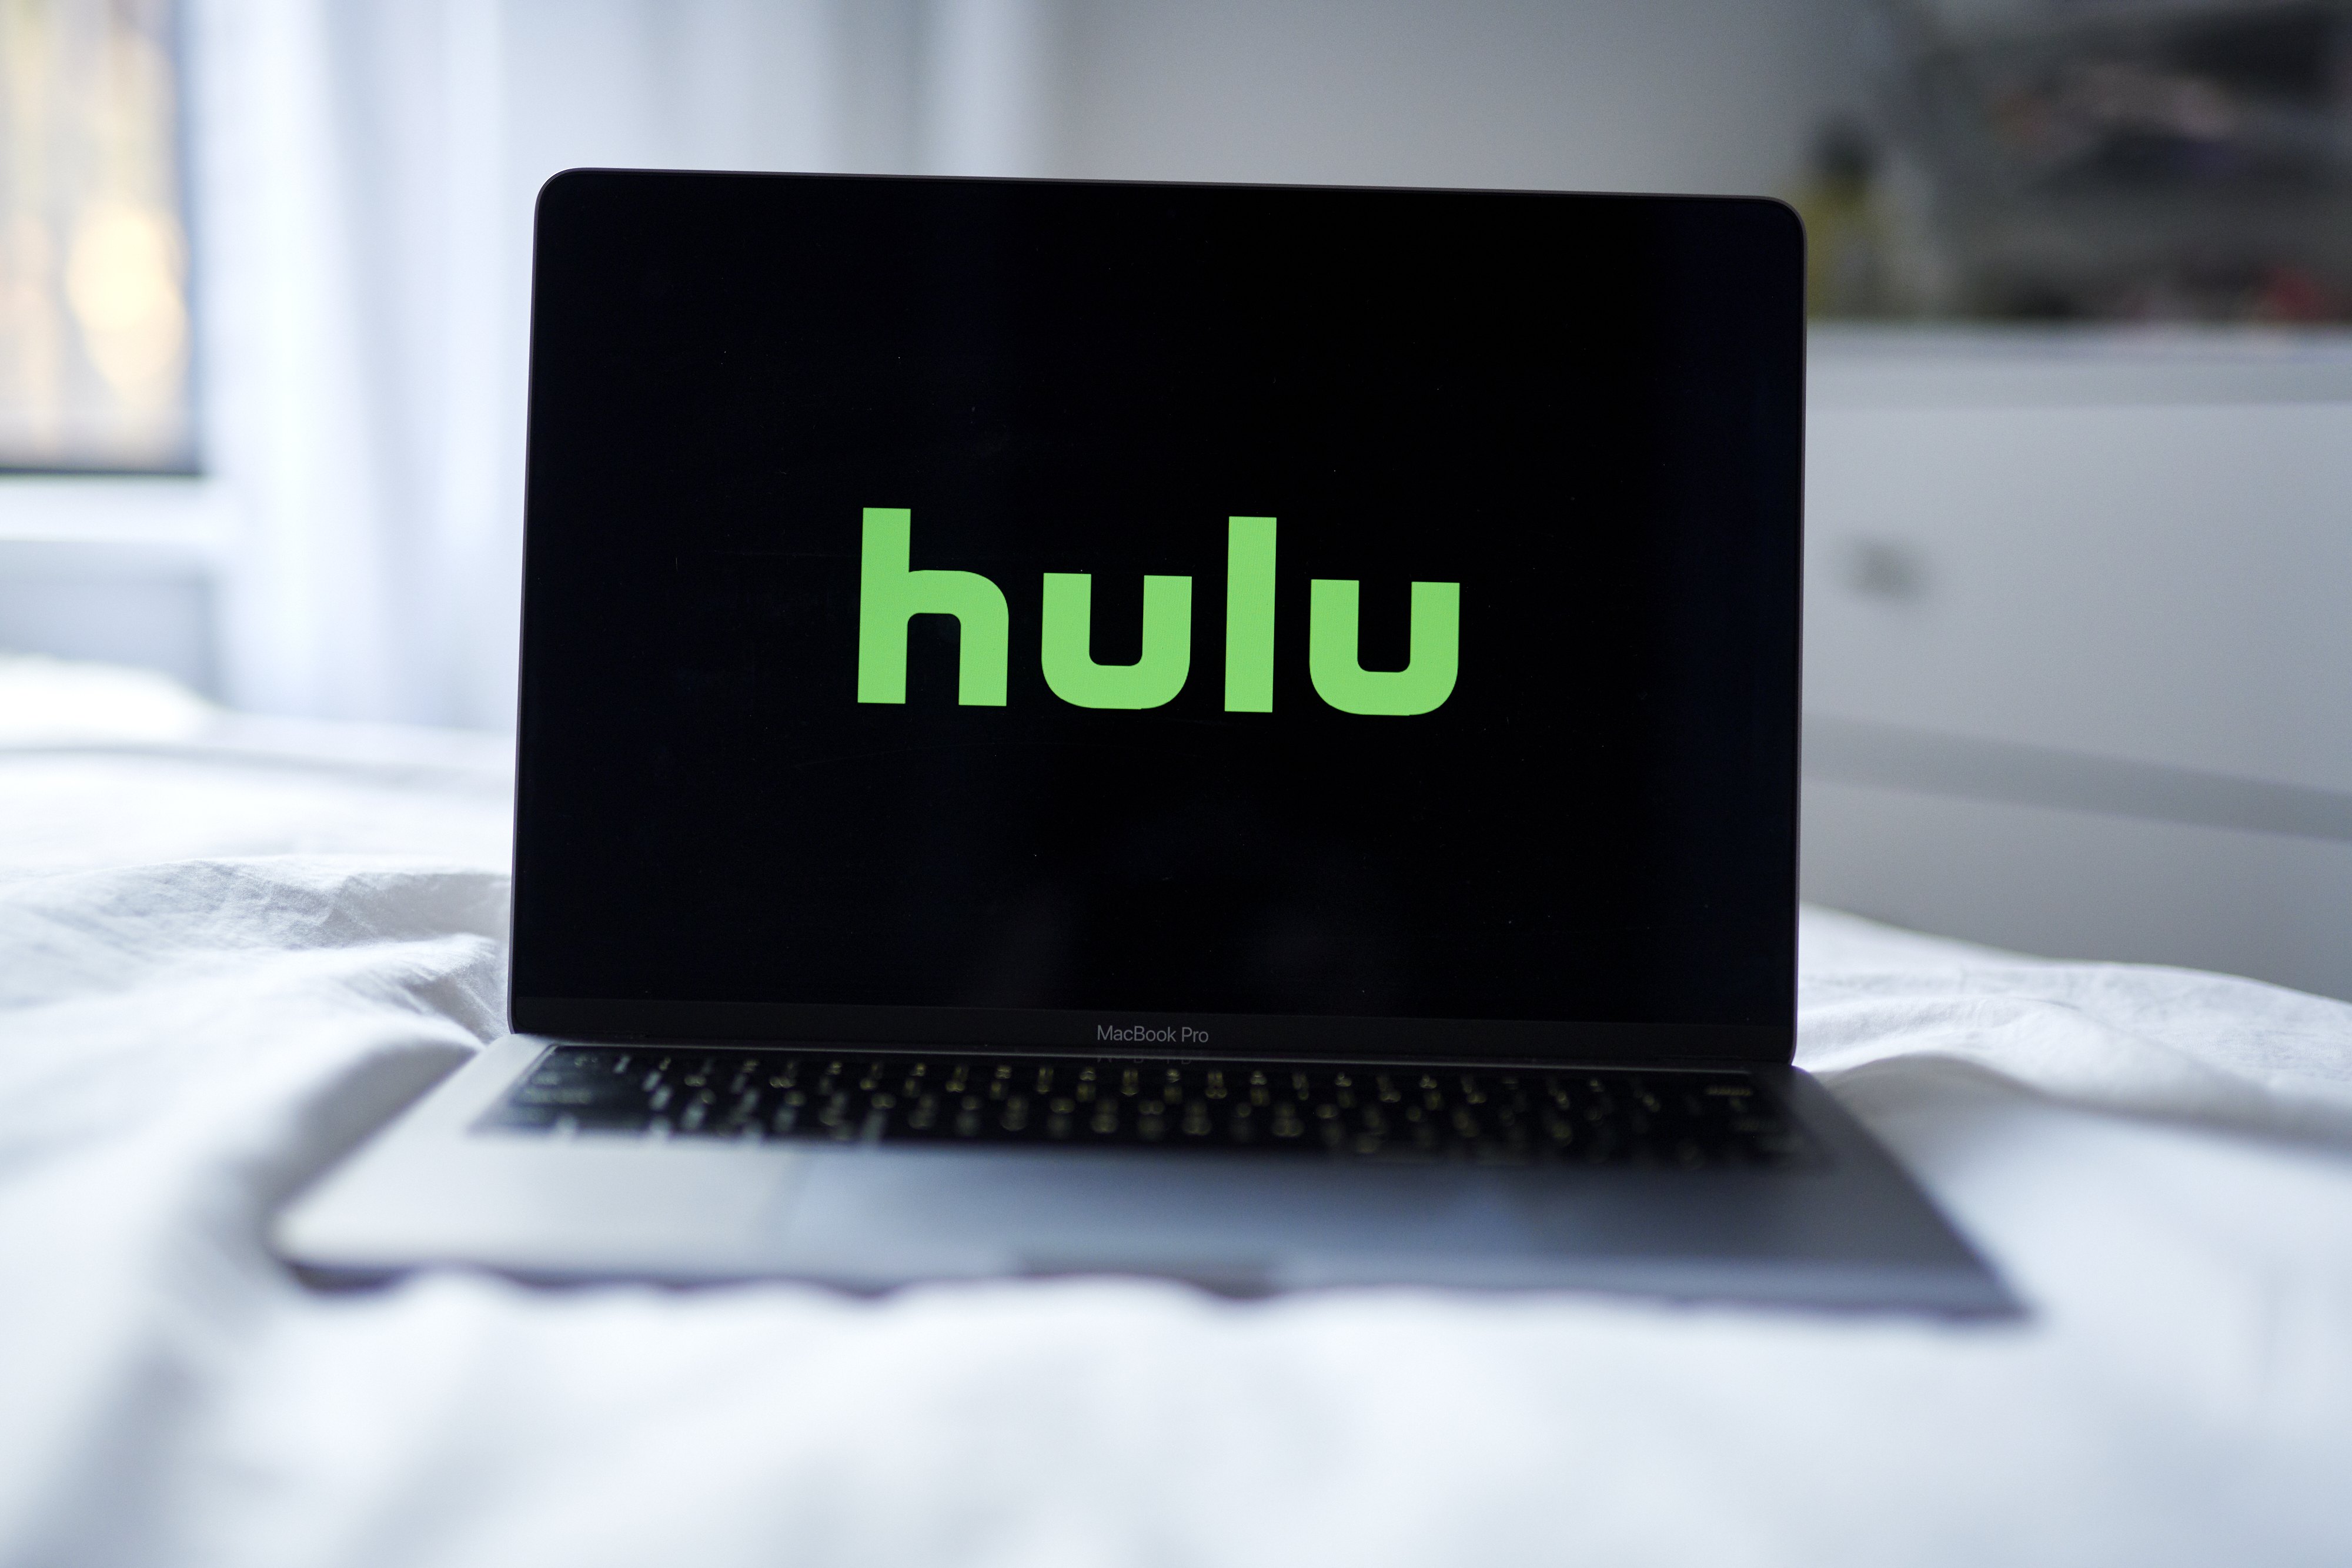 Comcast and Disney Start the Process to Complete the Hulu Sale